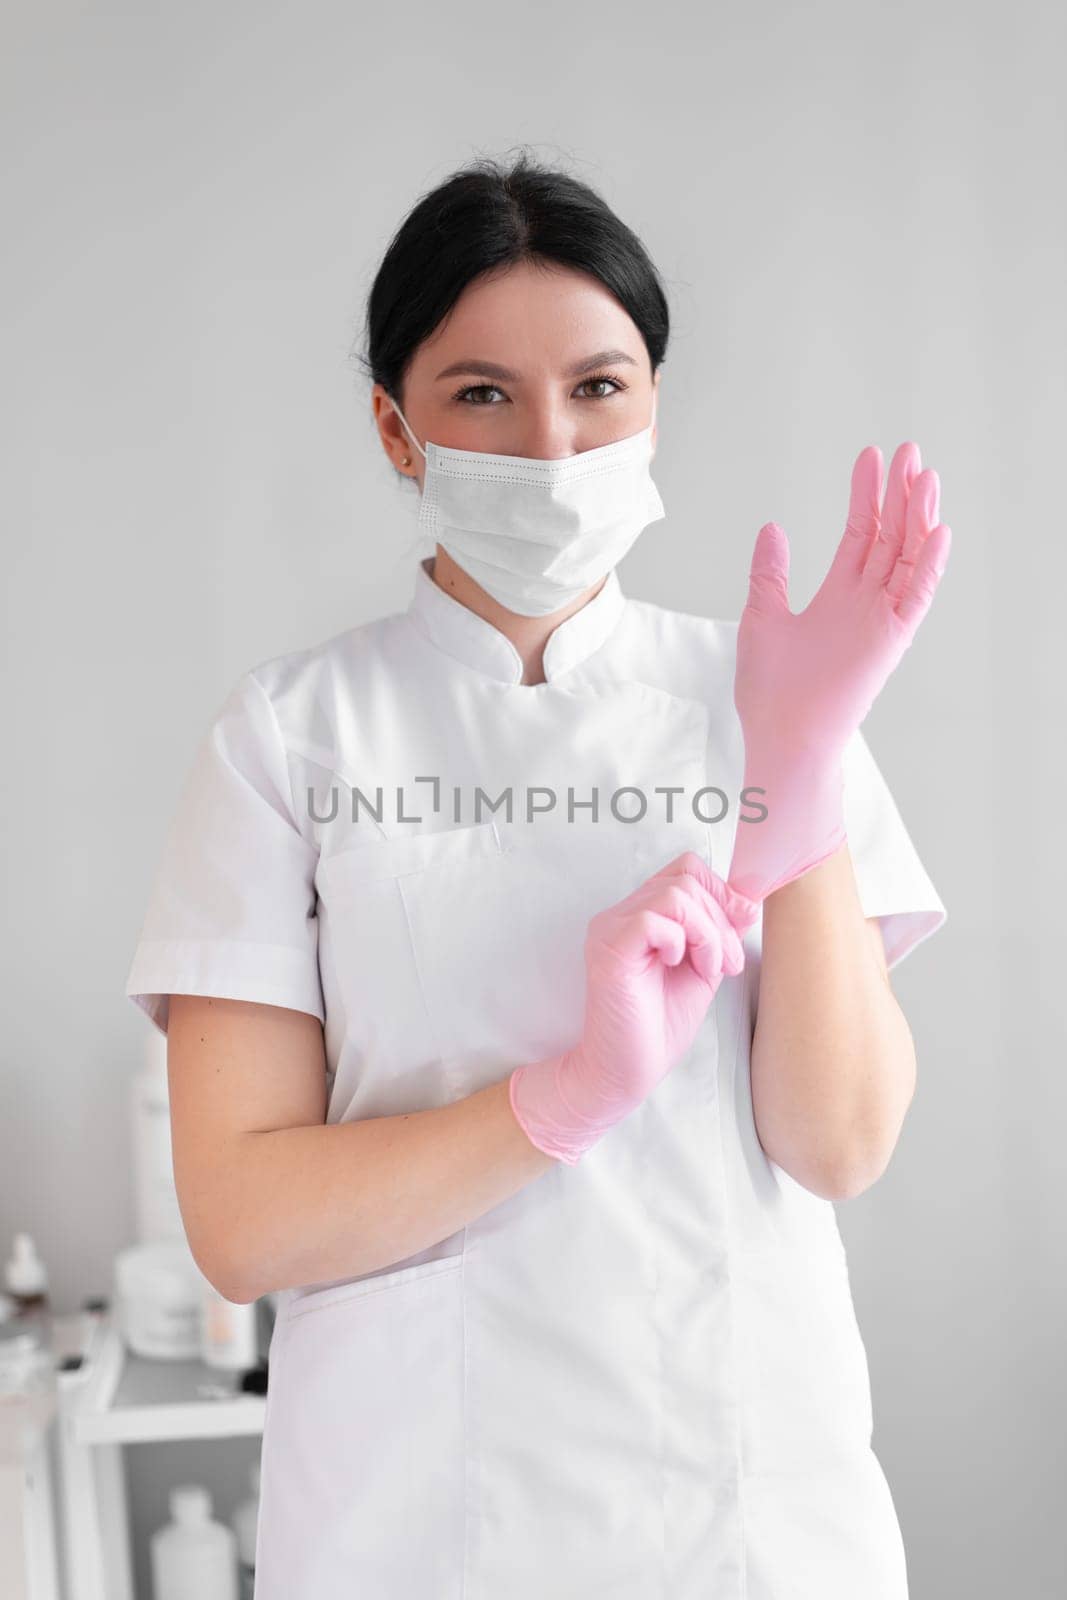 Female cosmetologist in mask putting on pink gloves before beauty treatment in clinic. Confident woman dermatologist in uniform working in hospital.